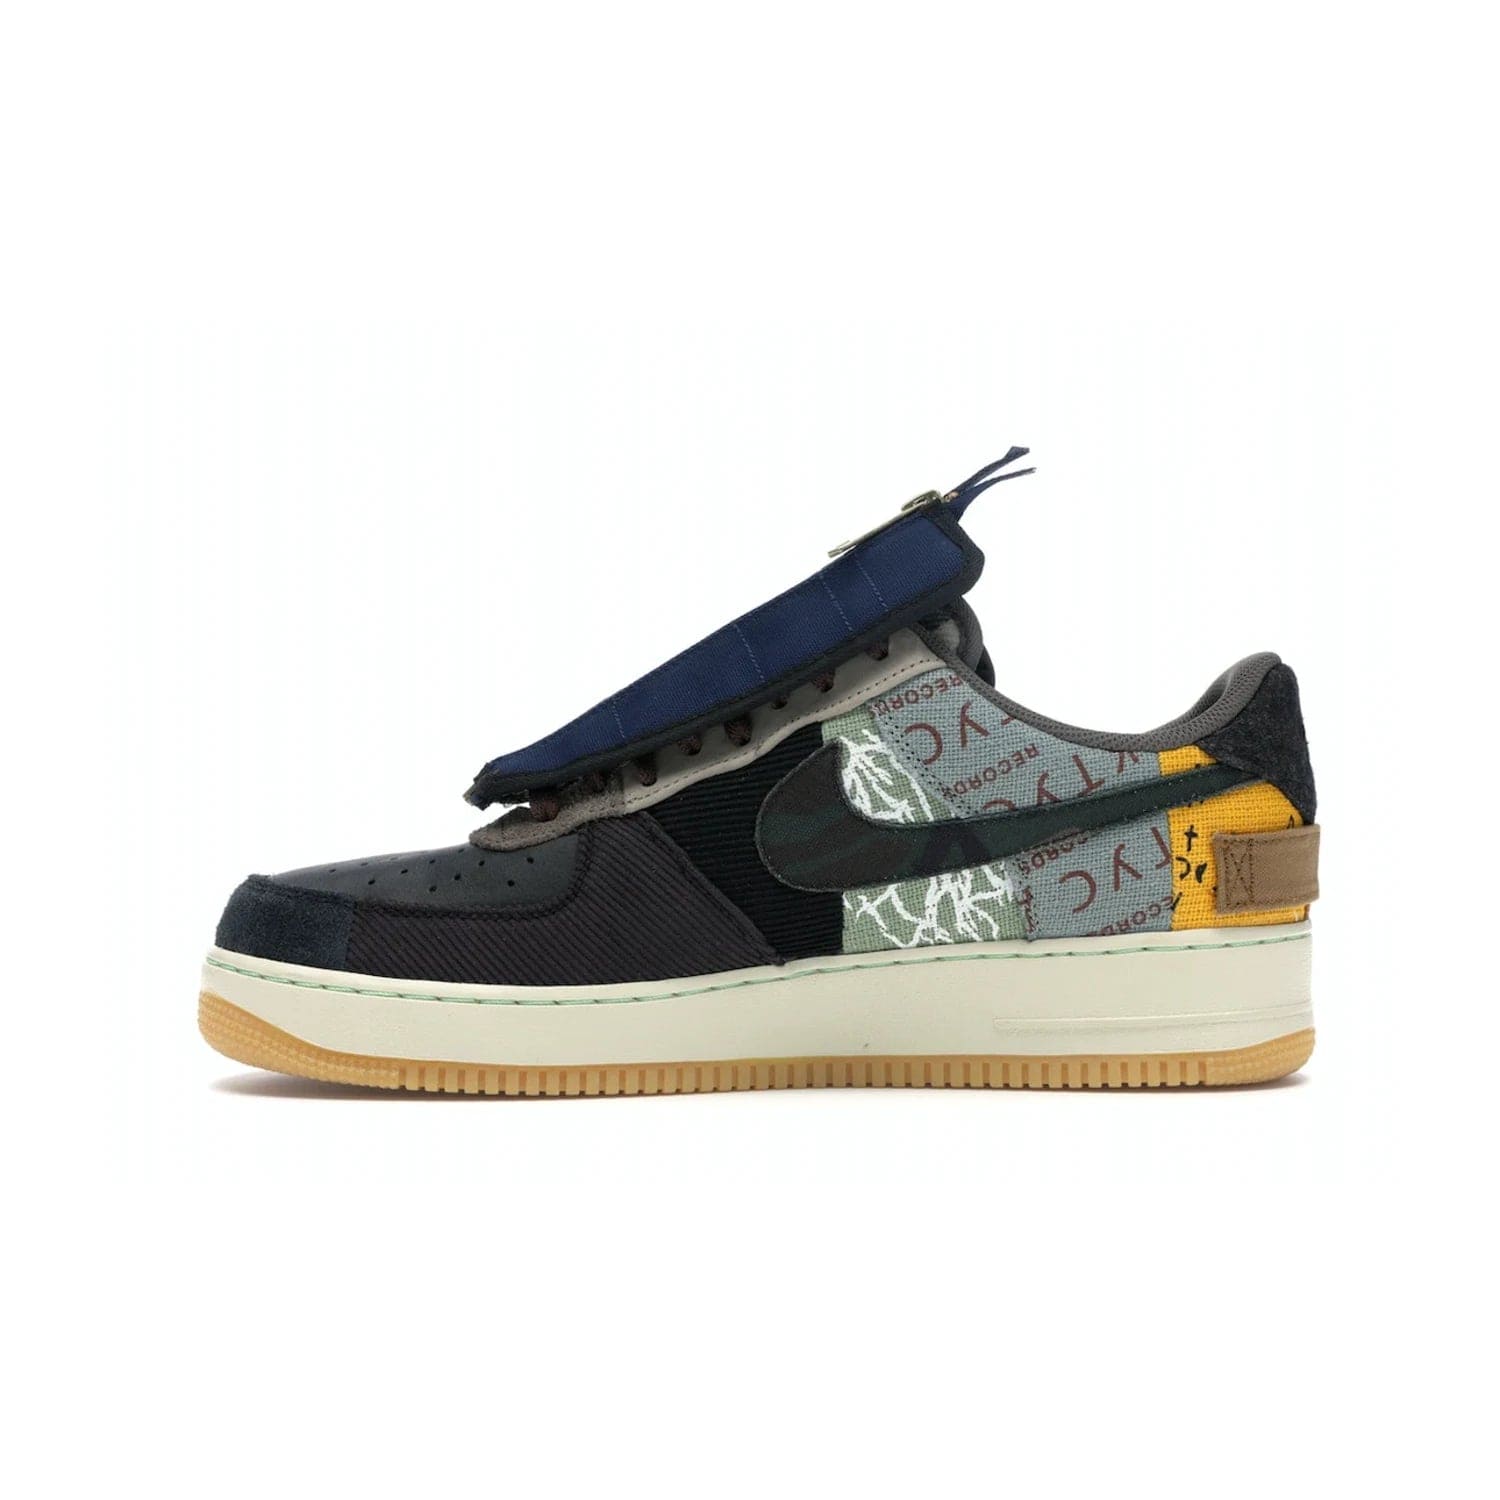 Nike Air Force 1 Low Travis Scott Cactus Jack - Image 19 - Only at www.BallersClubKickz.com - The Nike Air Force 1 Low Travis Scott Cactus Jack features a unique, multi-colored patchwork upper with muted bronze and fossil accents. Includes detachable lace cover, brass zipper, and Cactus Jack insignias. A sail midsole, gum rubber outsole complete the eye-catching design. Perfect for comfort and style with unexpected touches of detail.